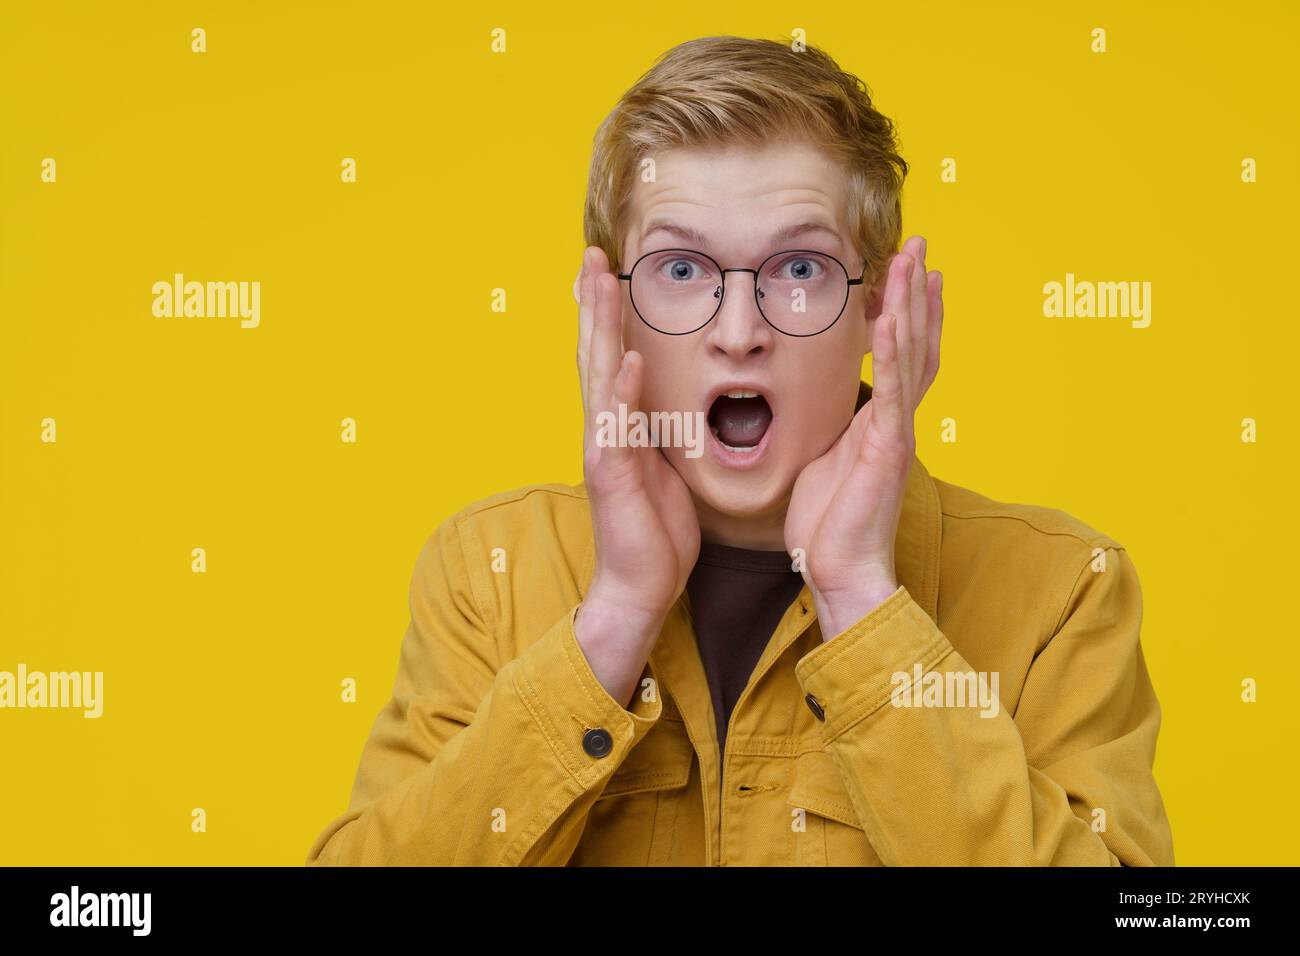 Scary Movie Concept. A Young European Actor Demonstrates a scene from a Cult Movie. Stock Photo